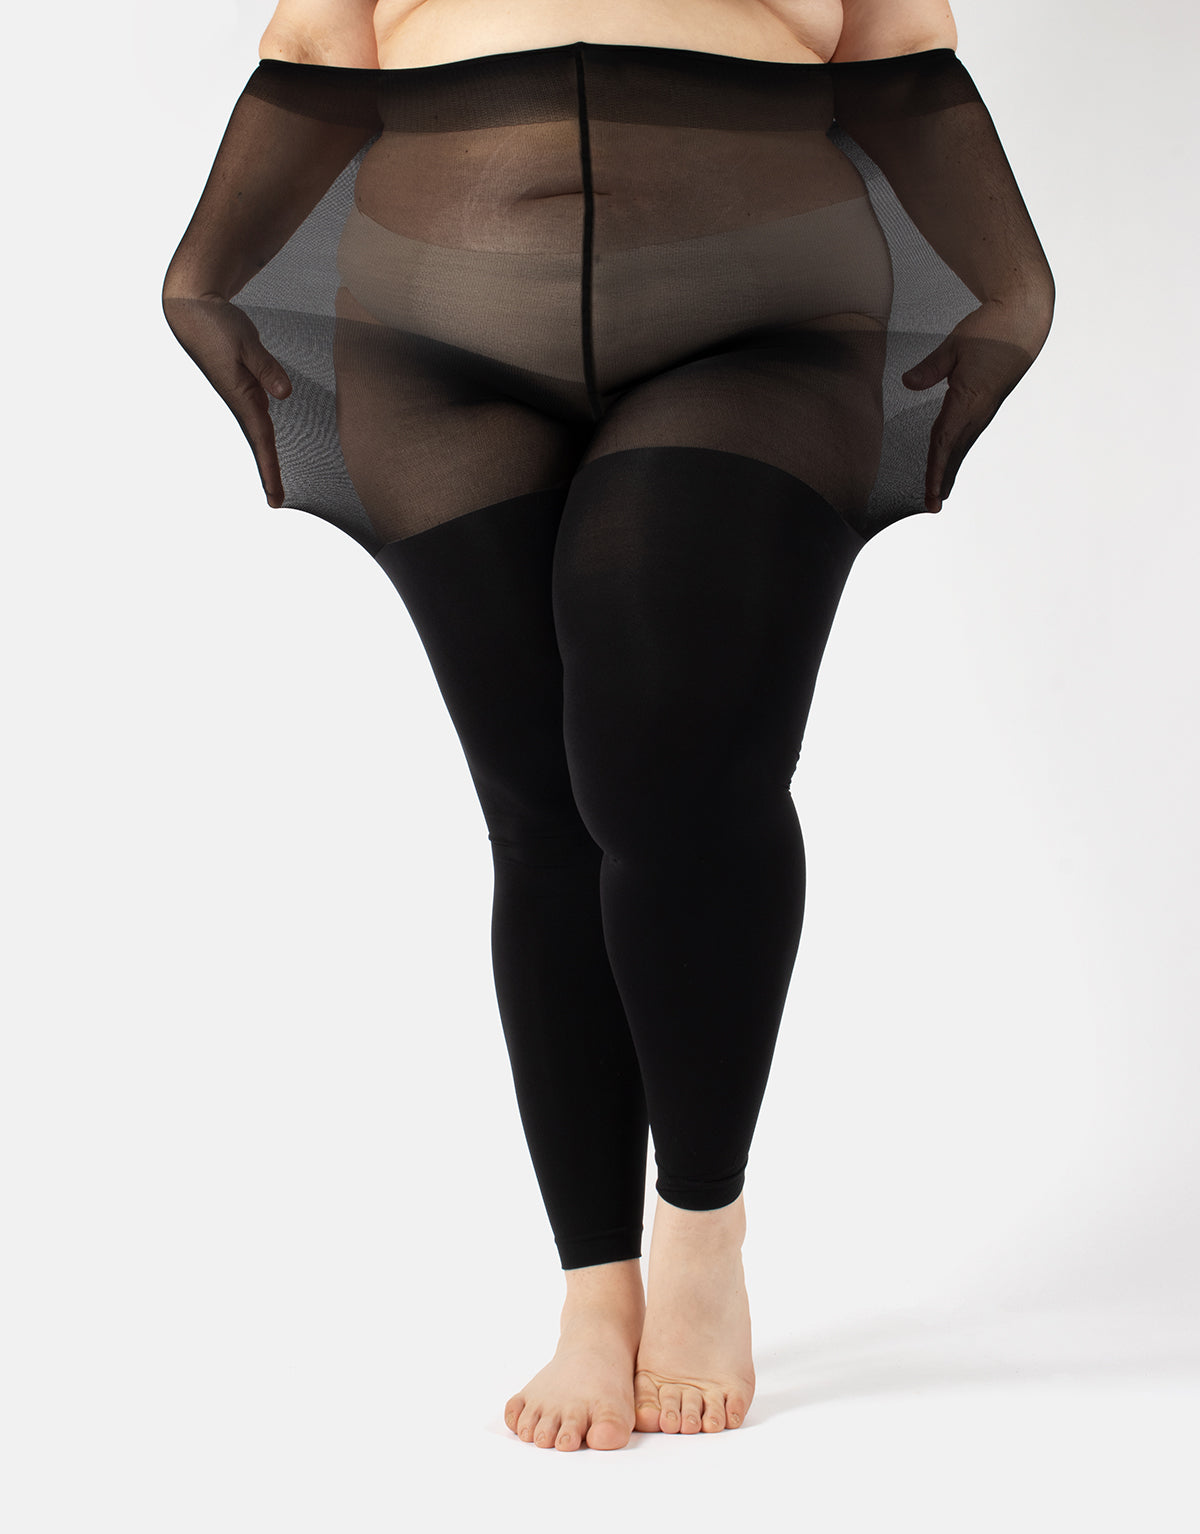 Calzitaly - Curvy Footless Tights – tights dept.